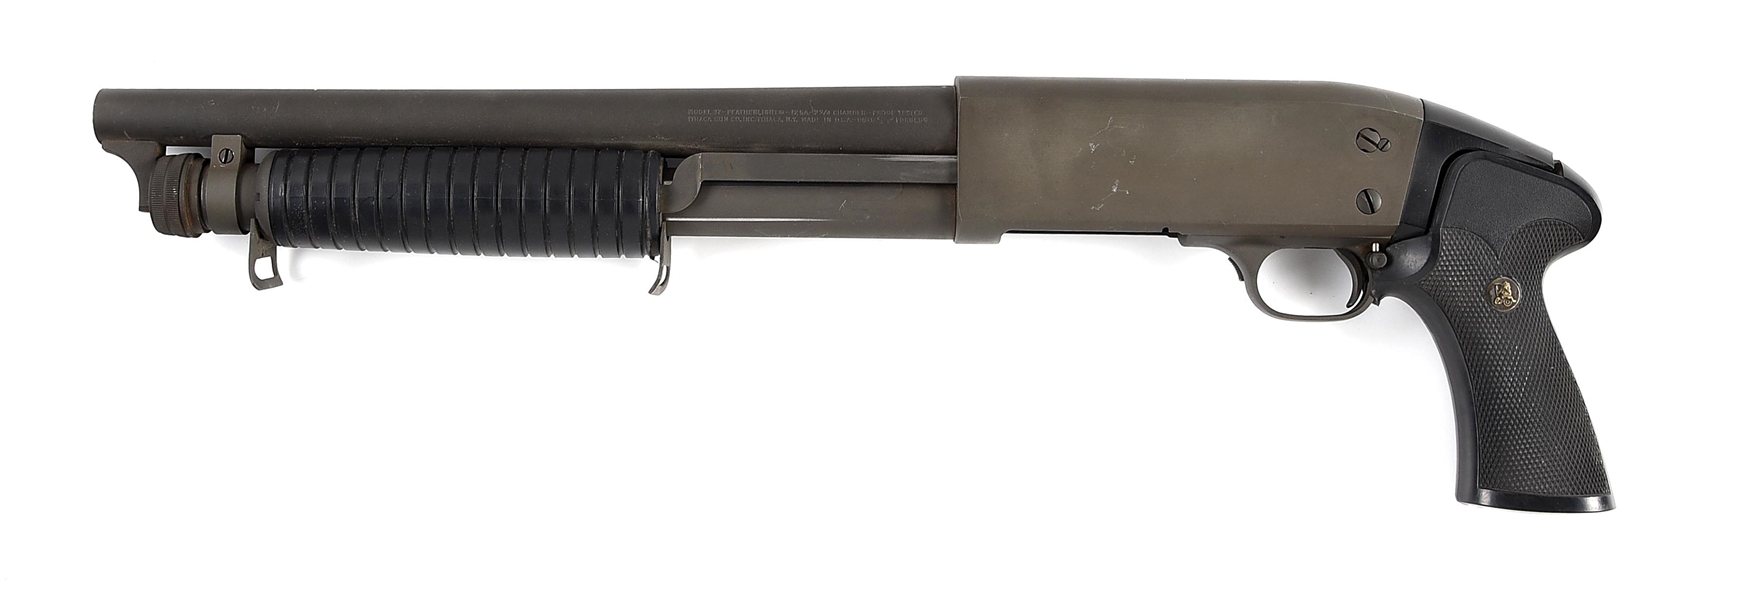 (N) ITHACA MODEL 37 FEATHERLIGHT "STAKEOUT" 12 BORE PUMP ACTION SHOTGUN (ANY OTHER WEAPON).